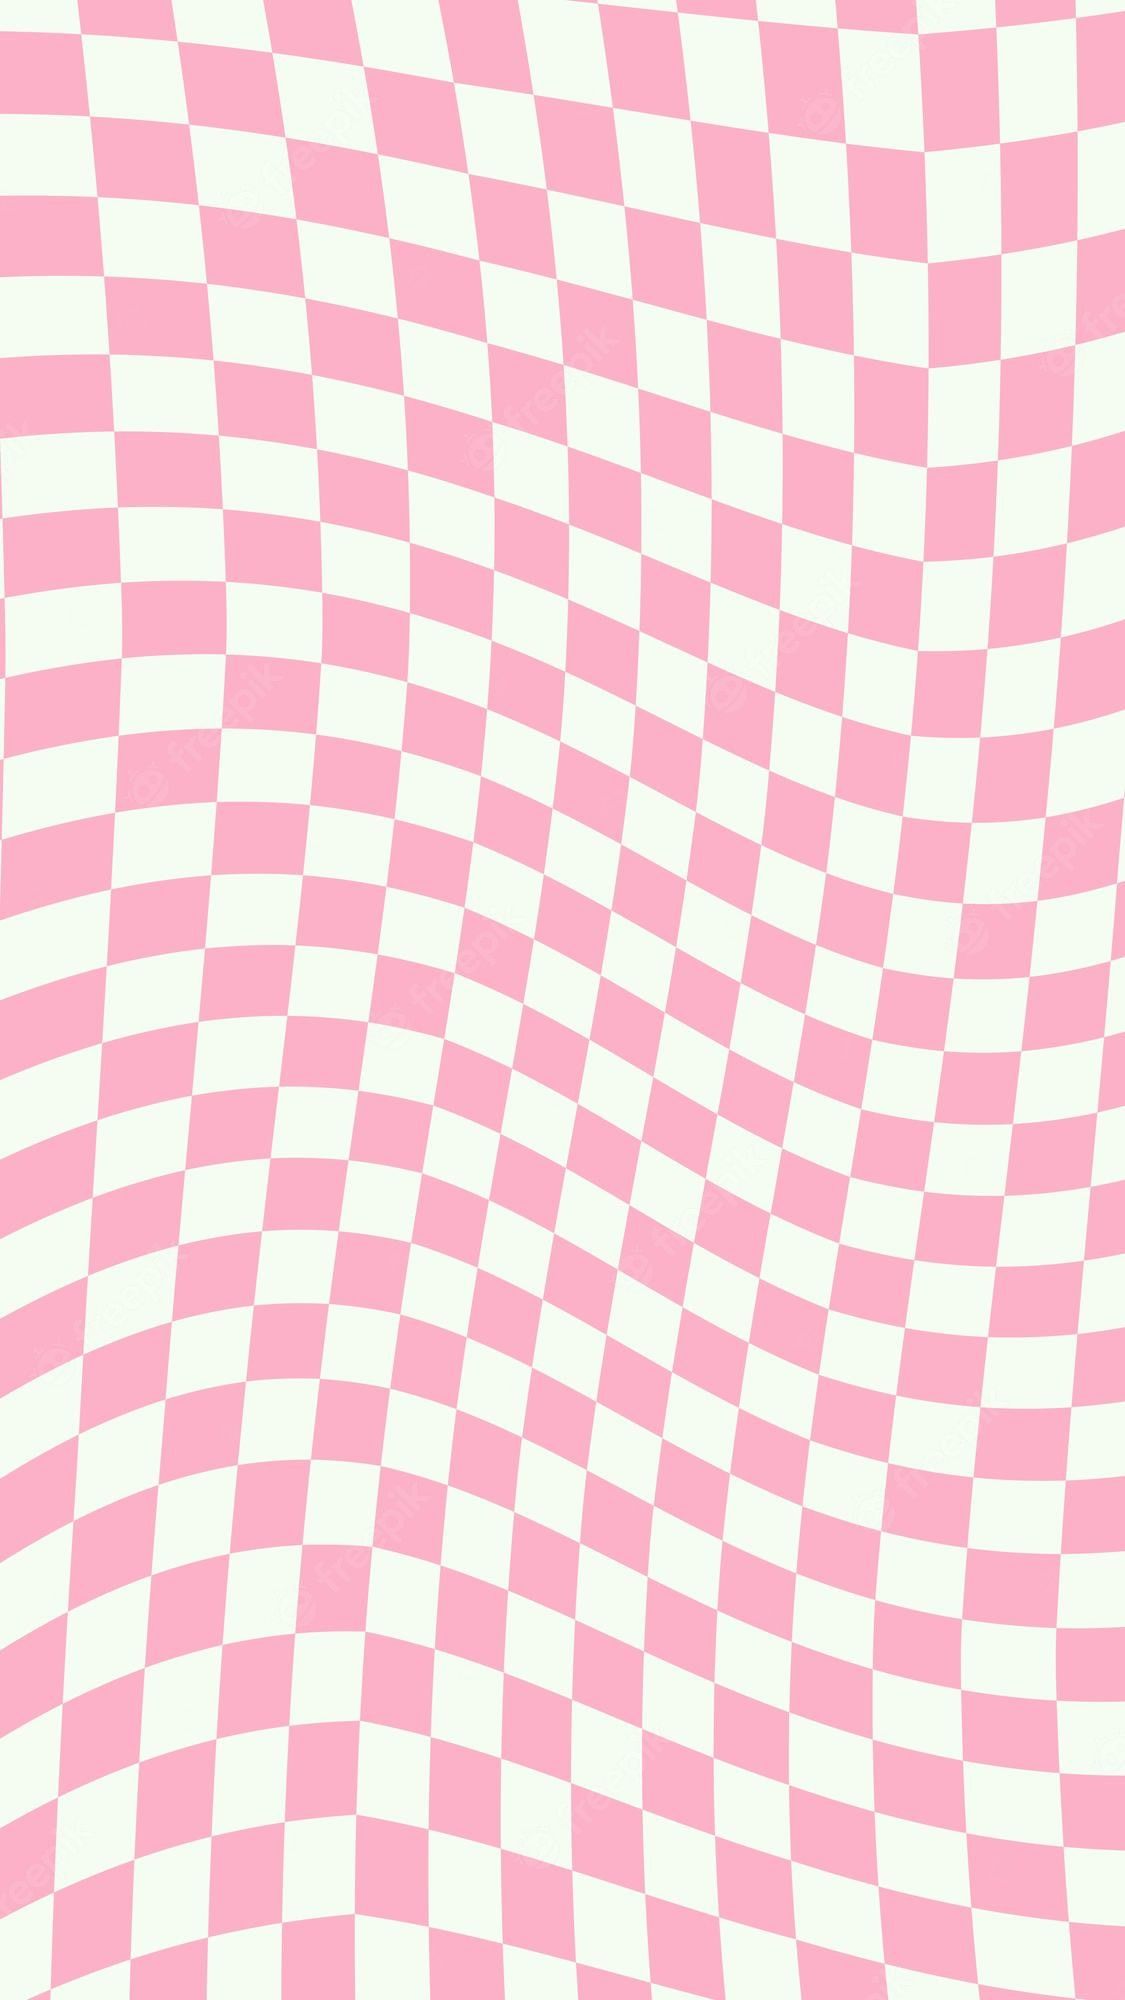 A pink and white checkerboard pattern - Cute pink, cute white, pastel pink, checkered